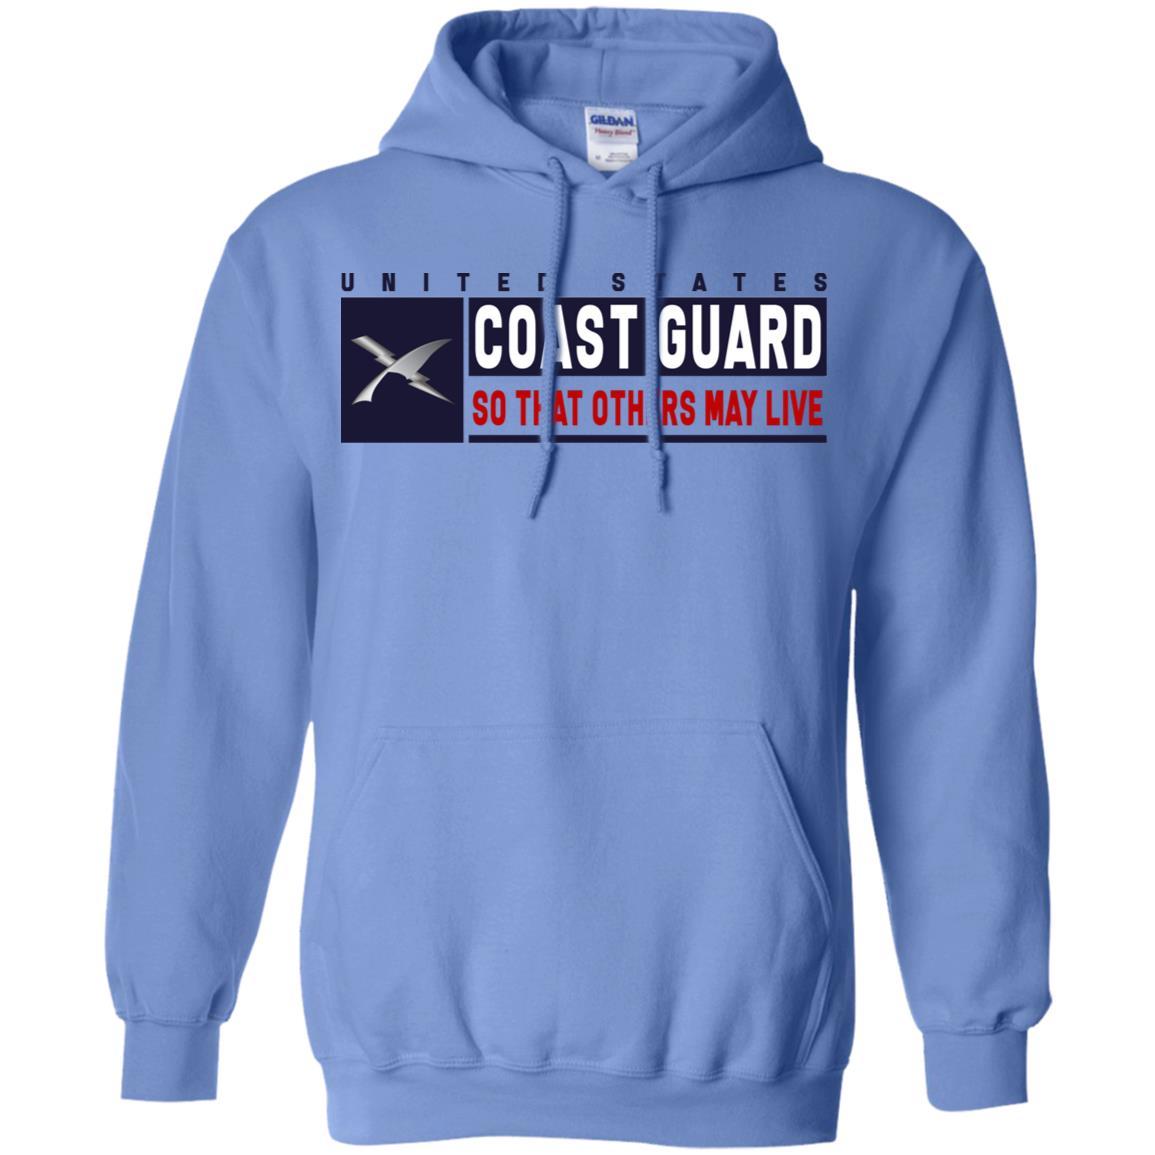 US Coast Guard Intelligence Specialist IS Logo- So that others may live Long Sleeve - Pullover Hoodie-TShirt-USCG-Veterans Nation